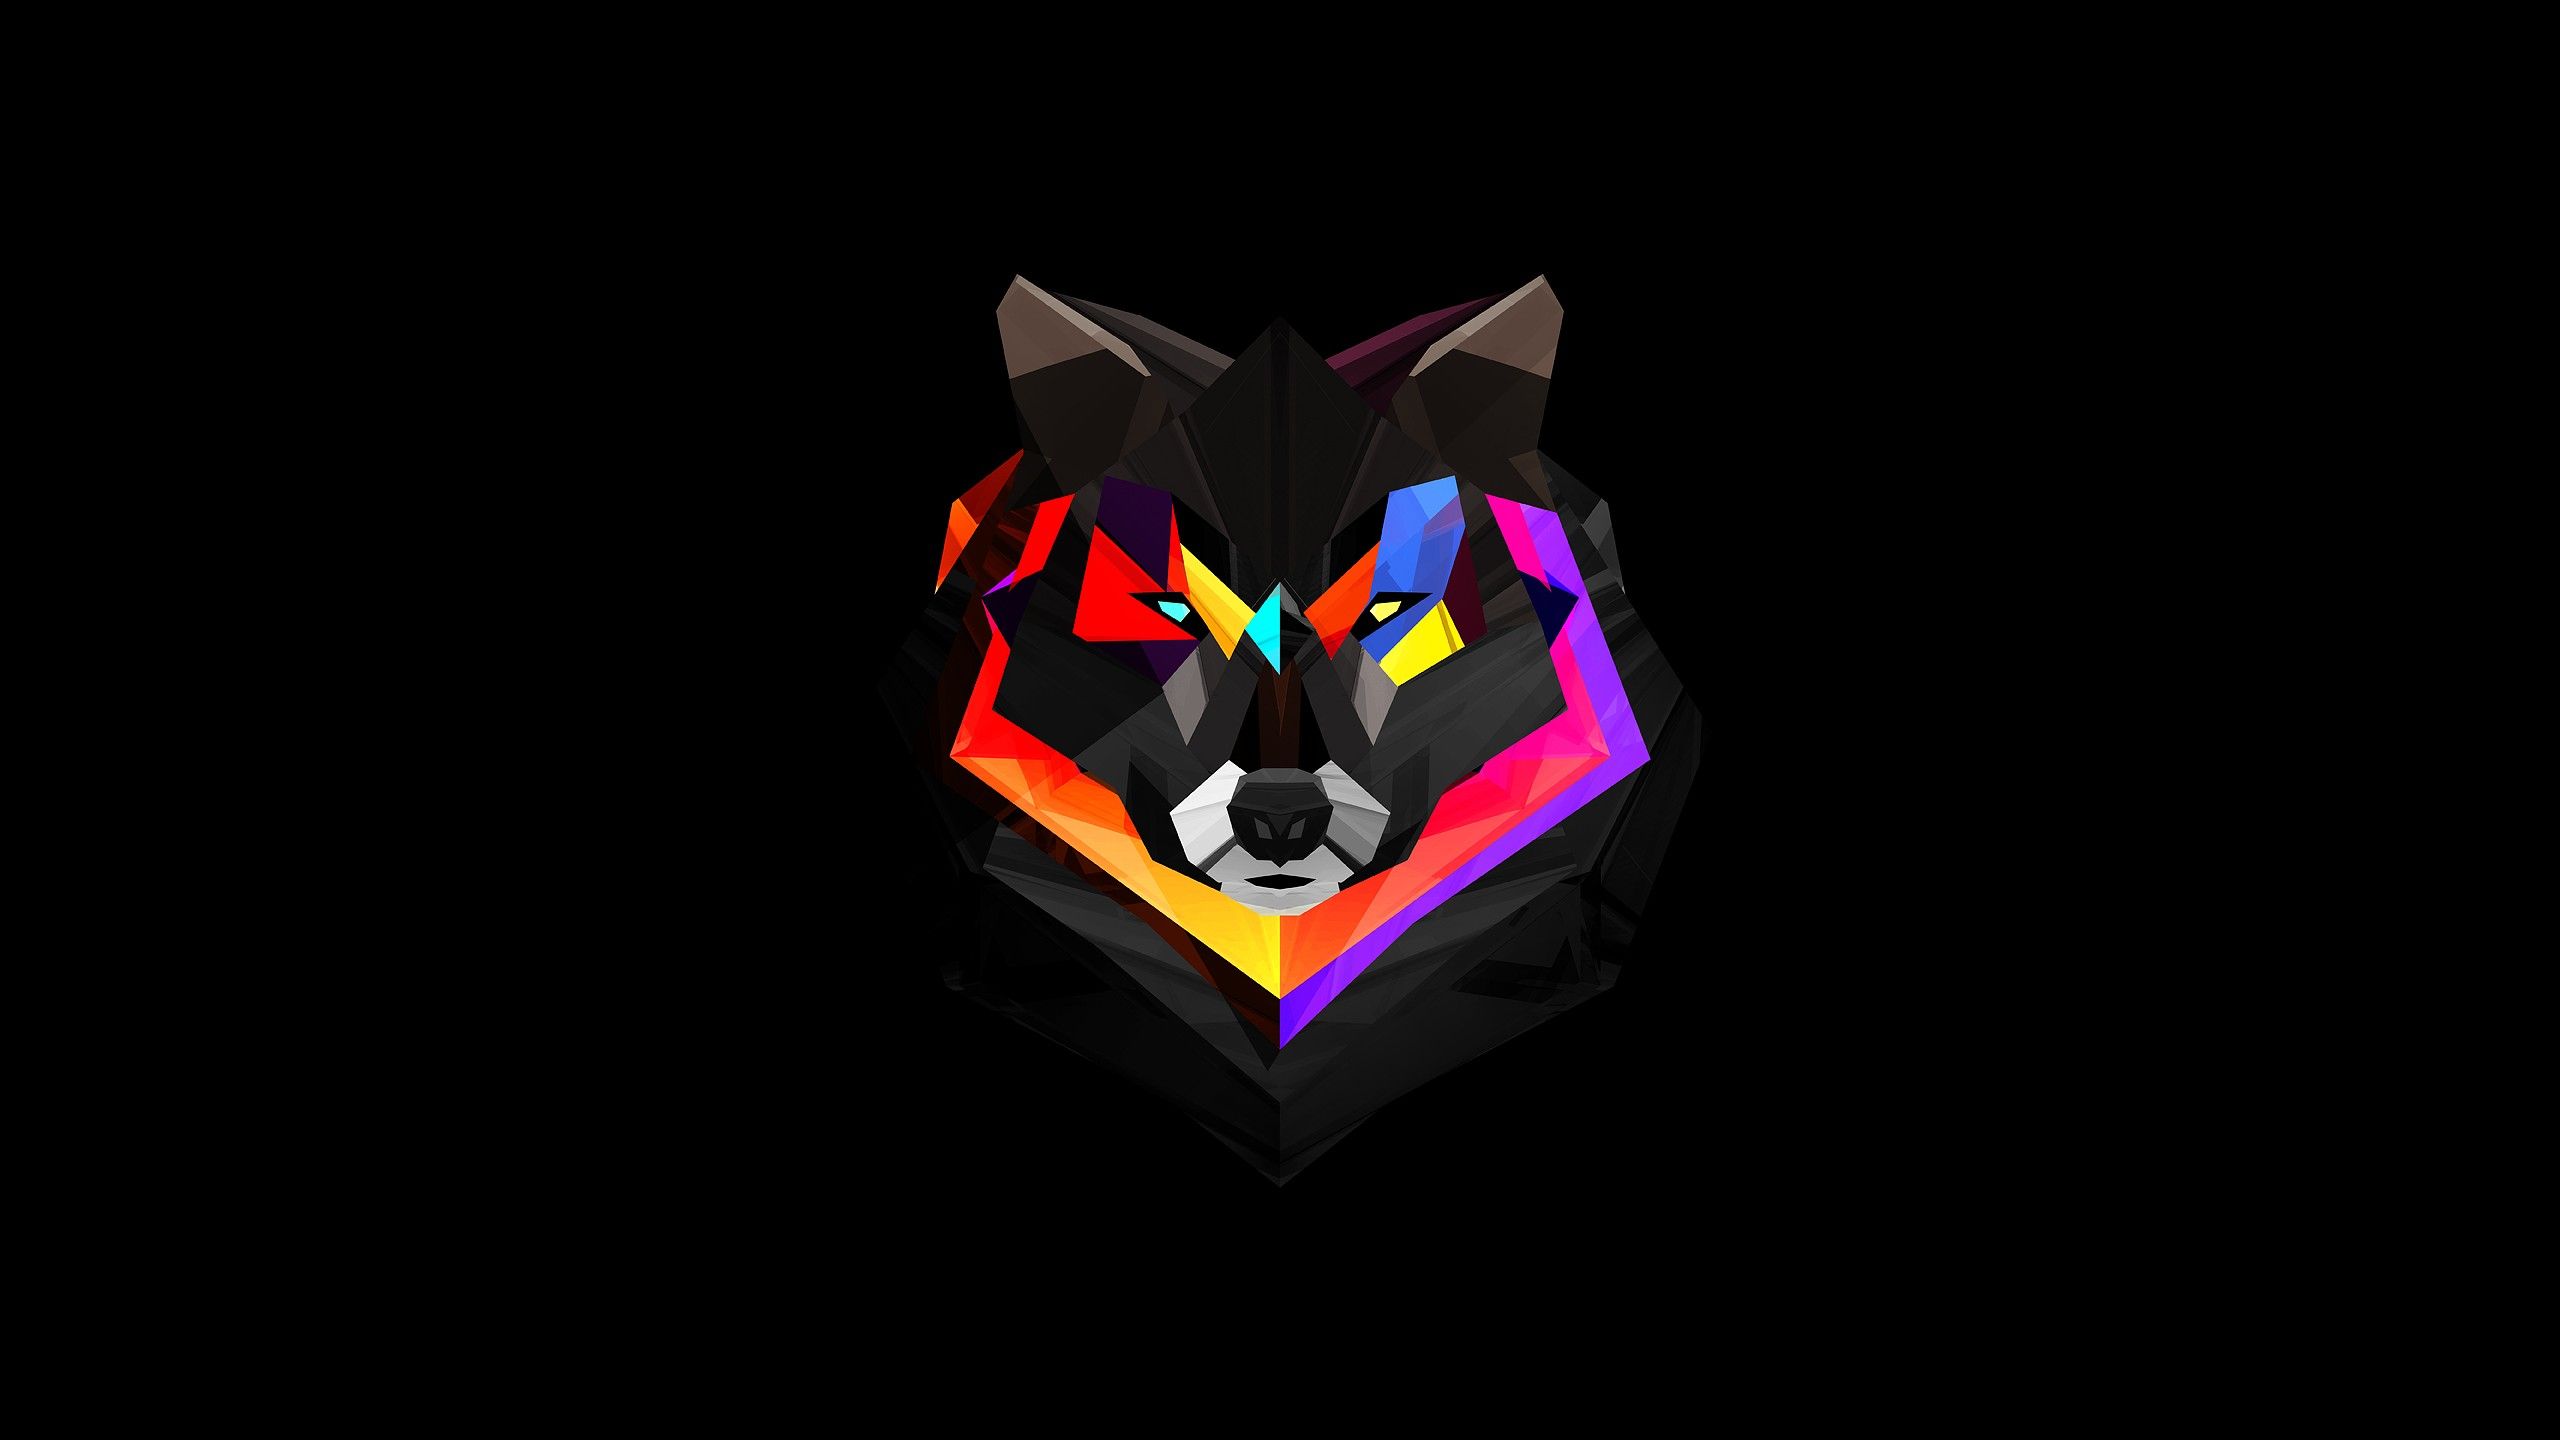 Awesome animals wallpapers Polygon art Wolf wallpaper Abstract